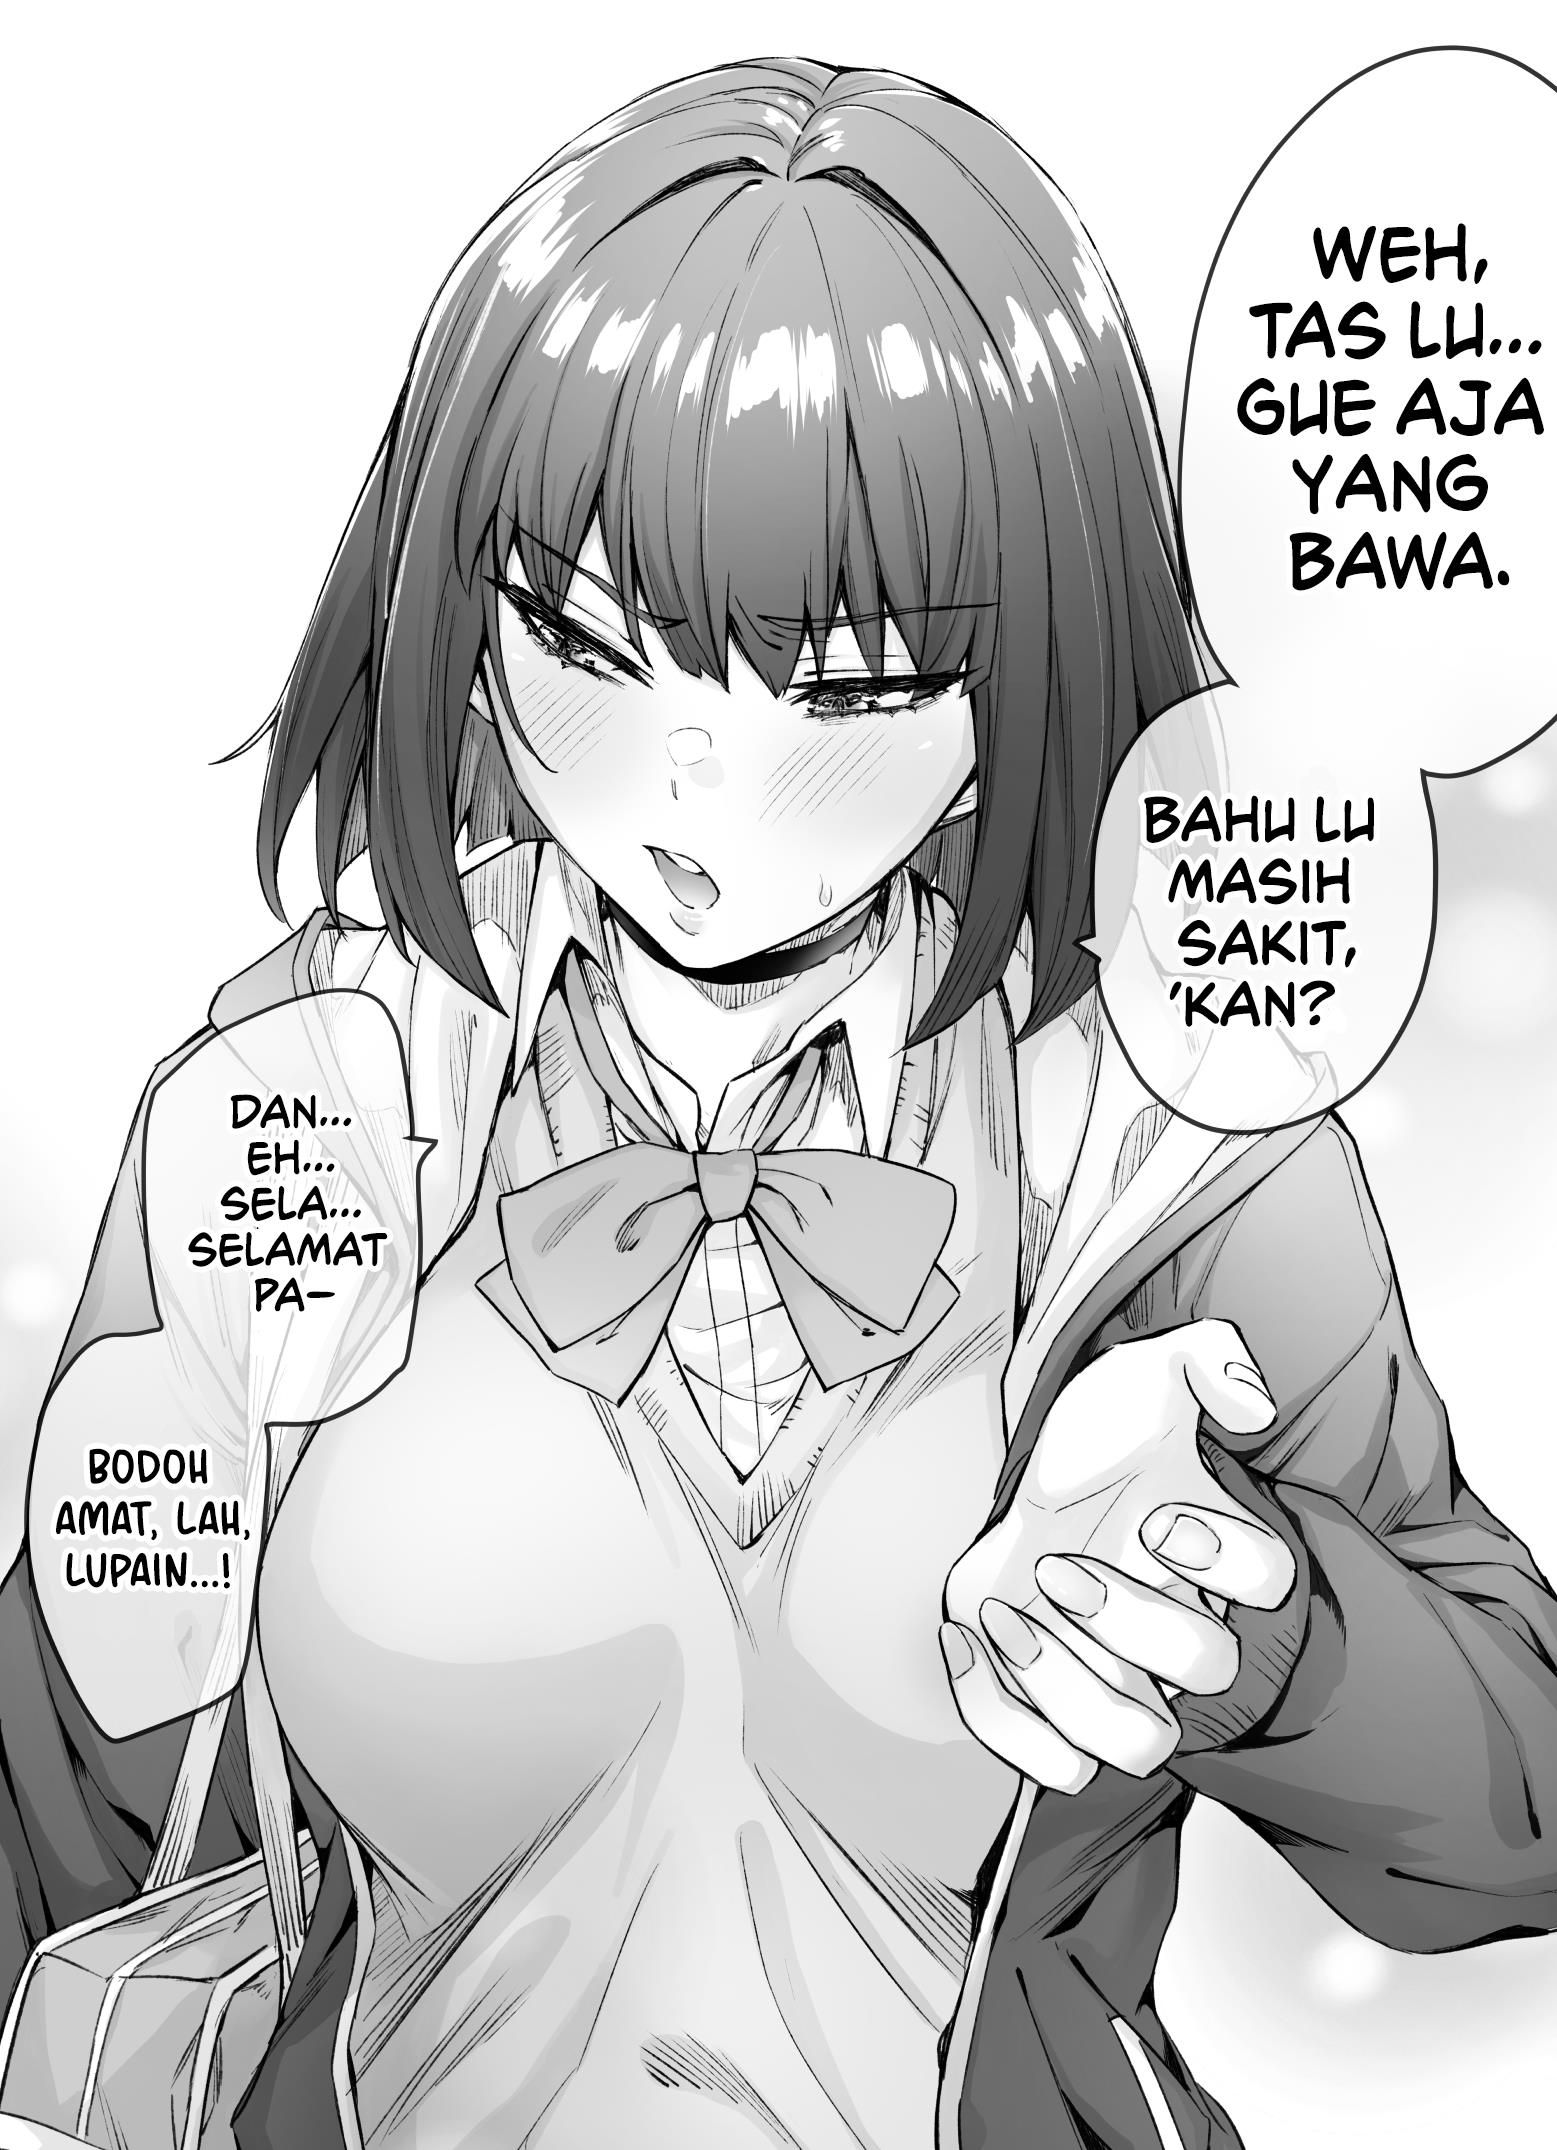 The Tsuntsuntsuntsuntsuntsun tsuntsuntsuntsuntsundere Girl Getting Less and Less Tsun Day by Day Chapter 12.2